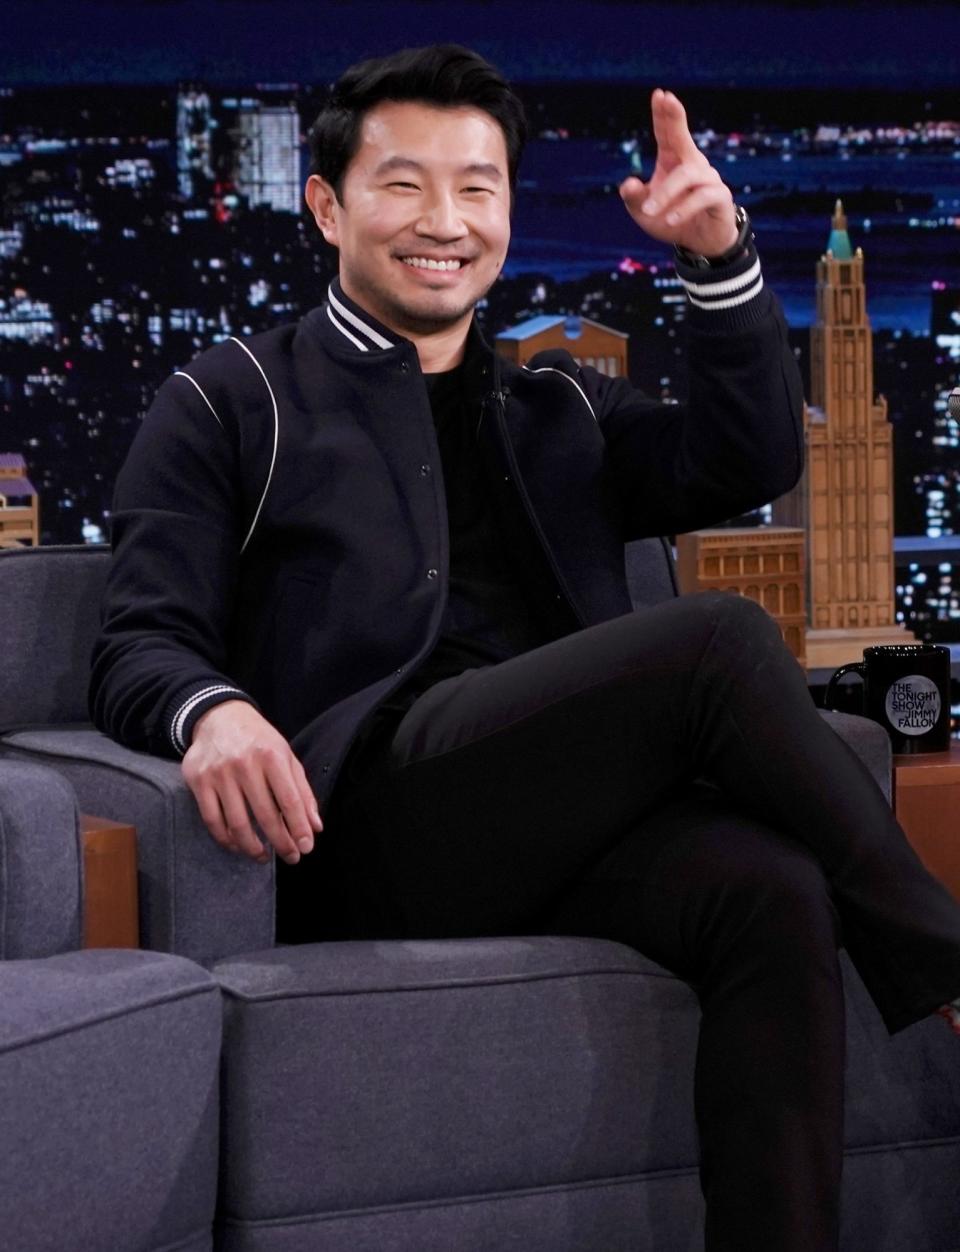 <p>Simu Liu greets the audience during an interview with Jimmy Fallon on <em>The Tonight Show Starring Jimmy Fallon </em>in N.Y.C. on Nov. 18. </p>